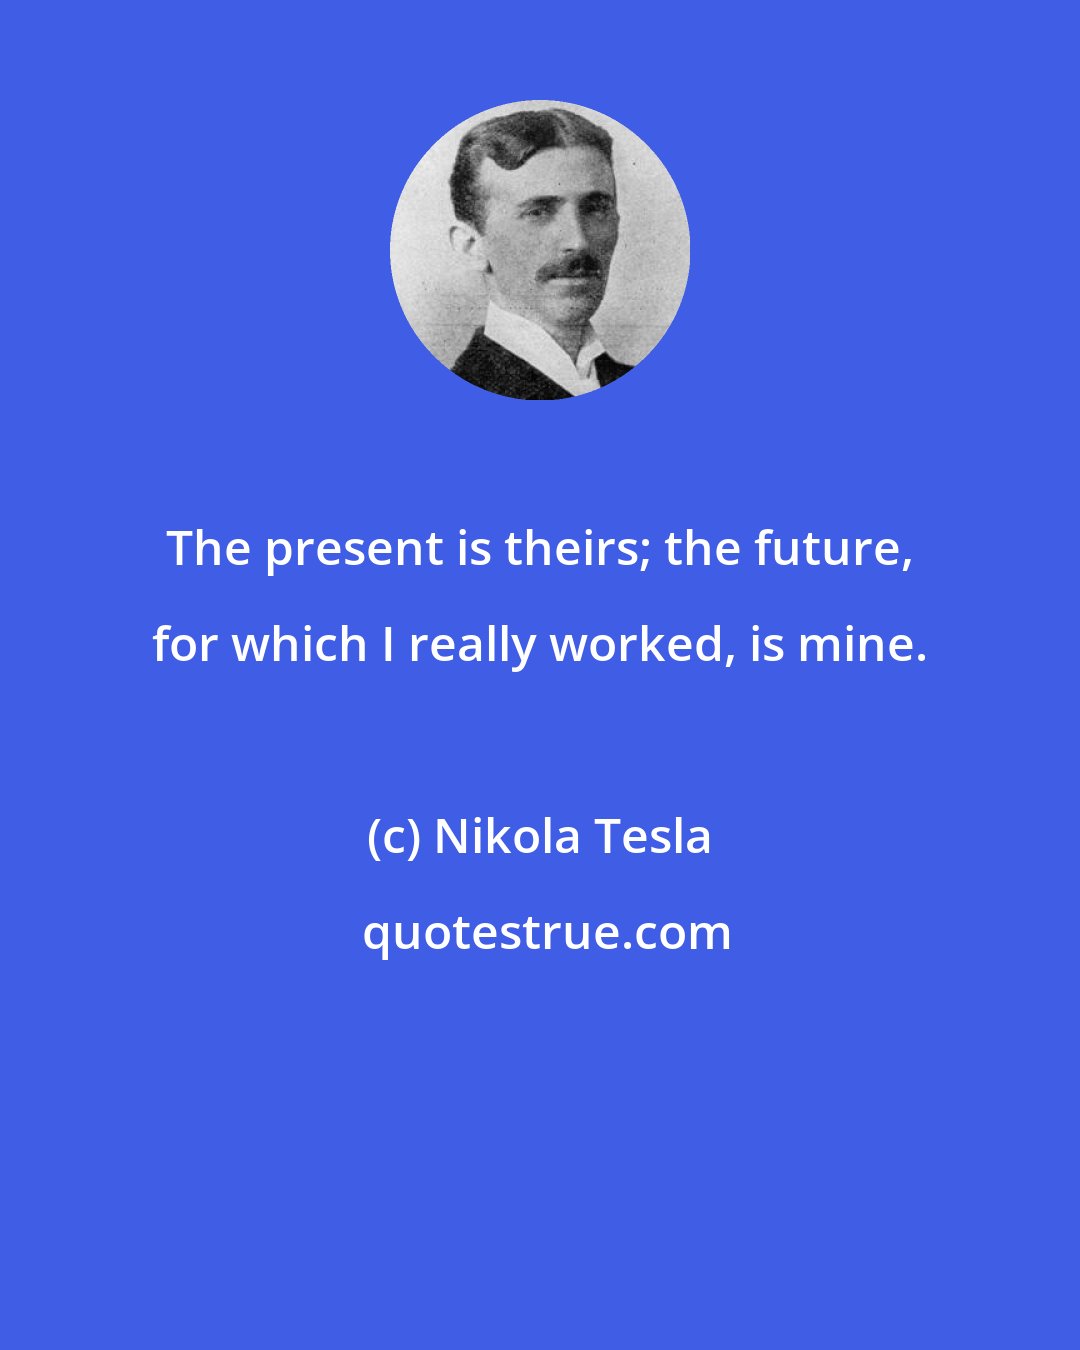 Nikola Tesla: The present is theirs; the future, for which I really worked, is mine.